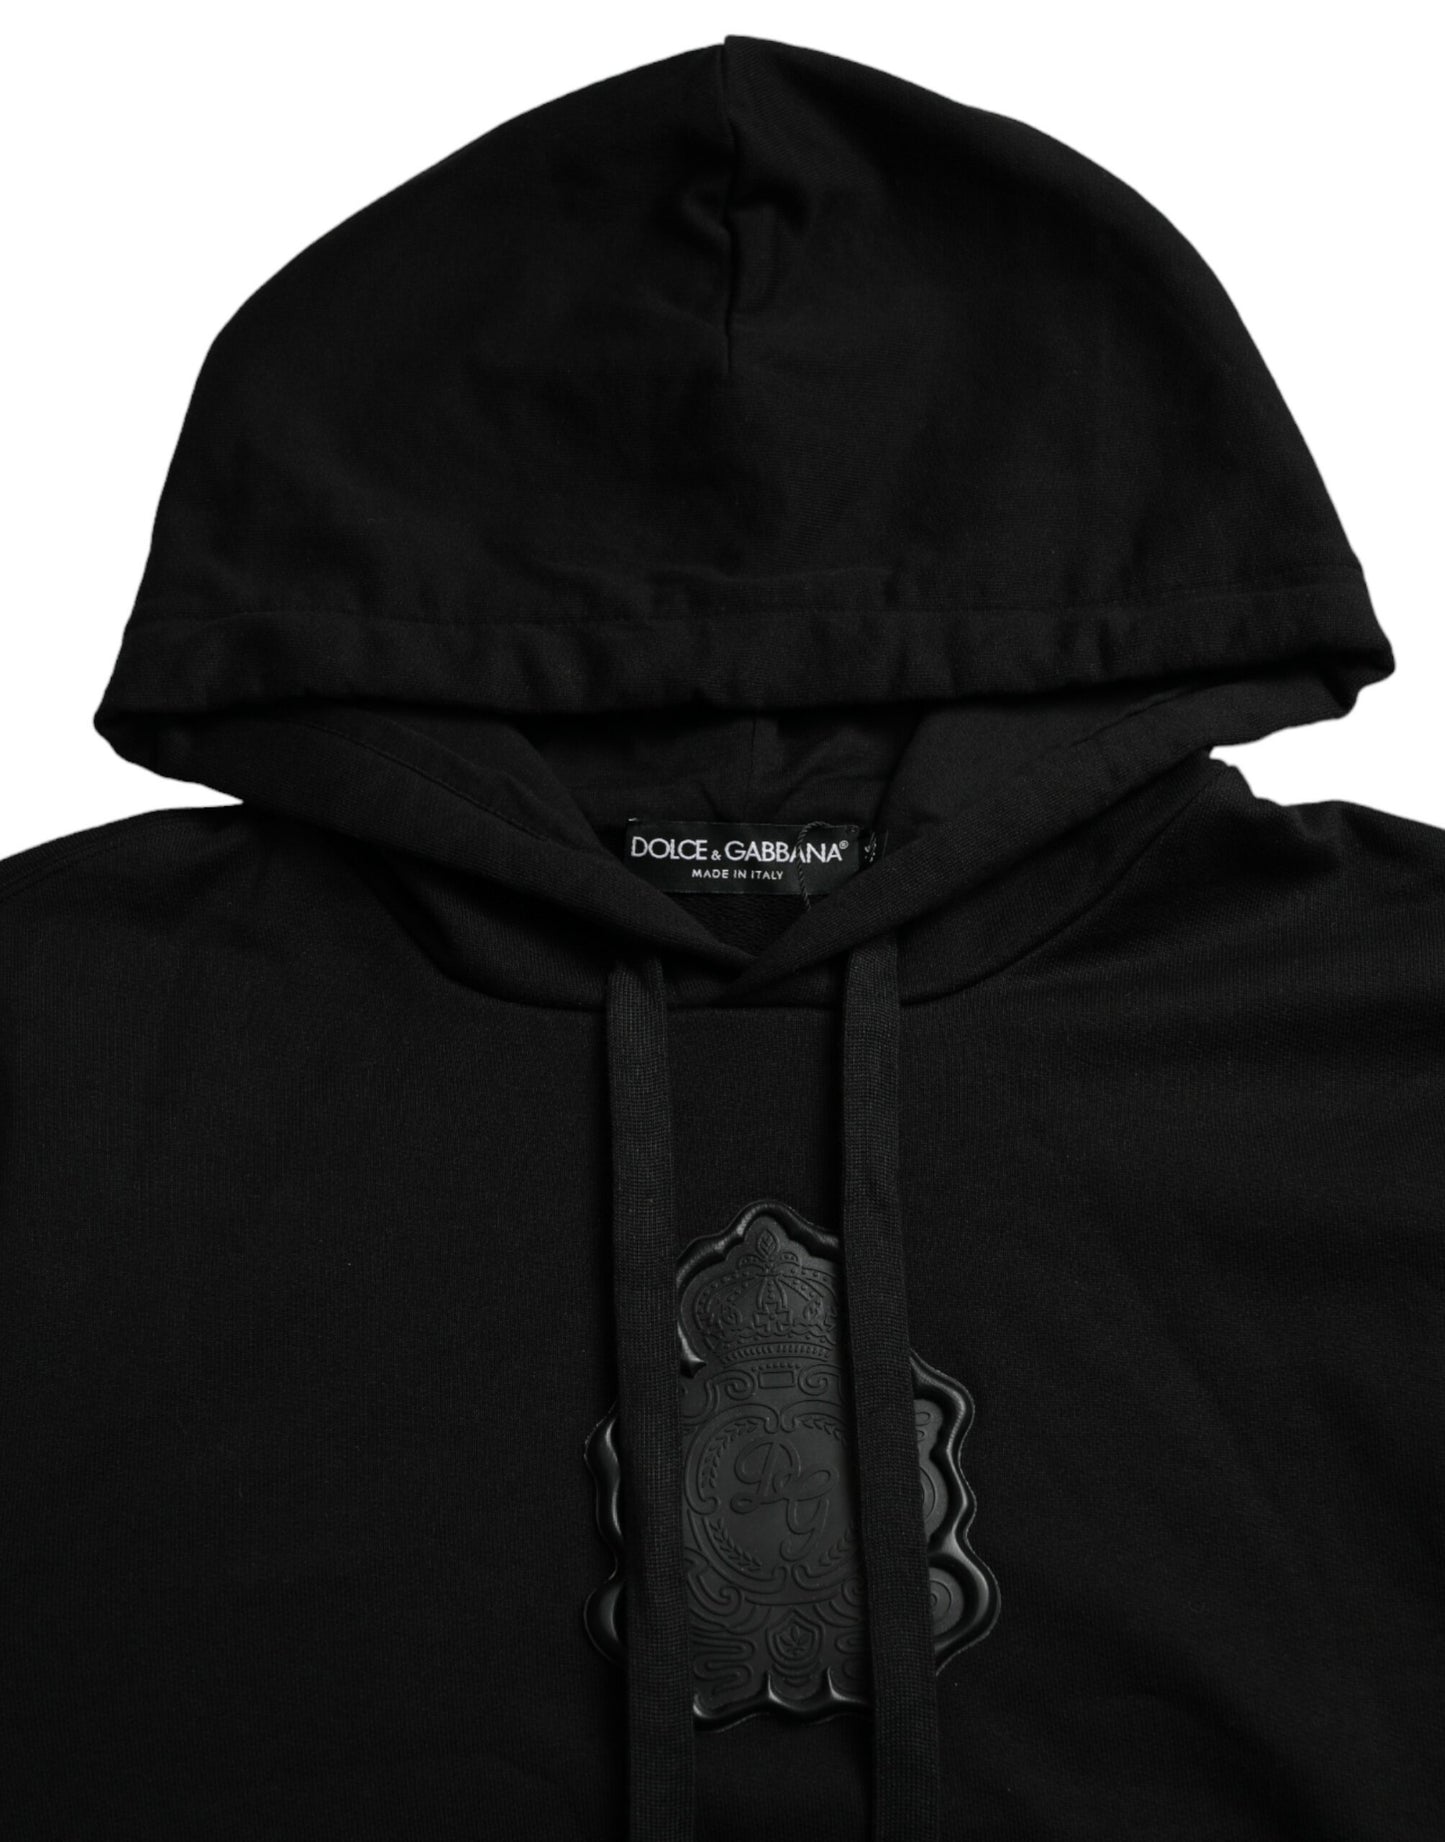 Dolce & Gabbana Black Cotton Hooded Pullover Sweater